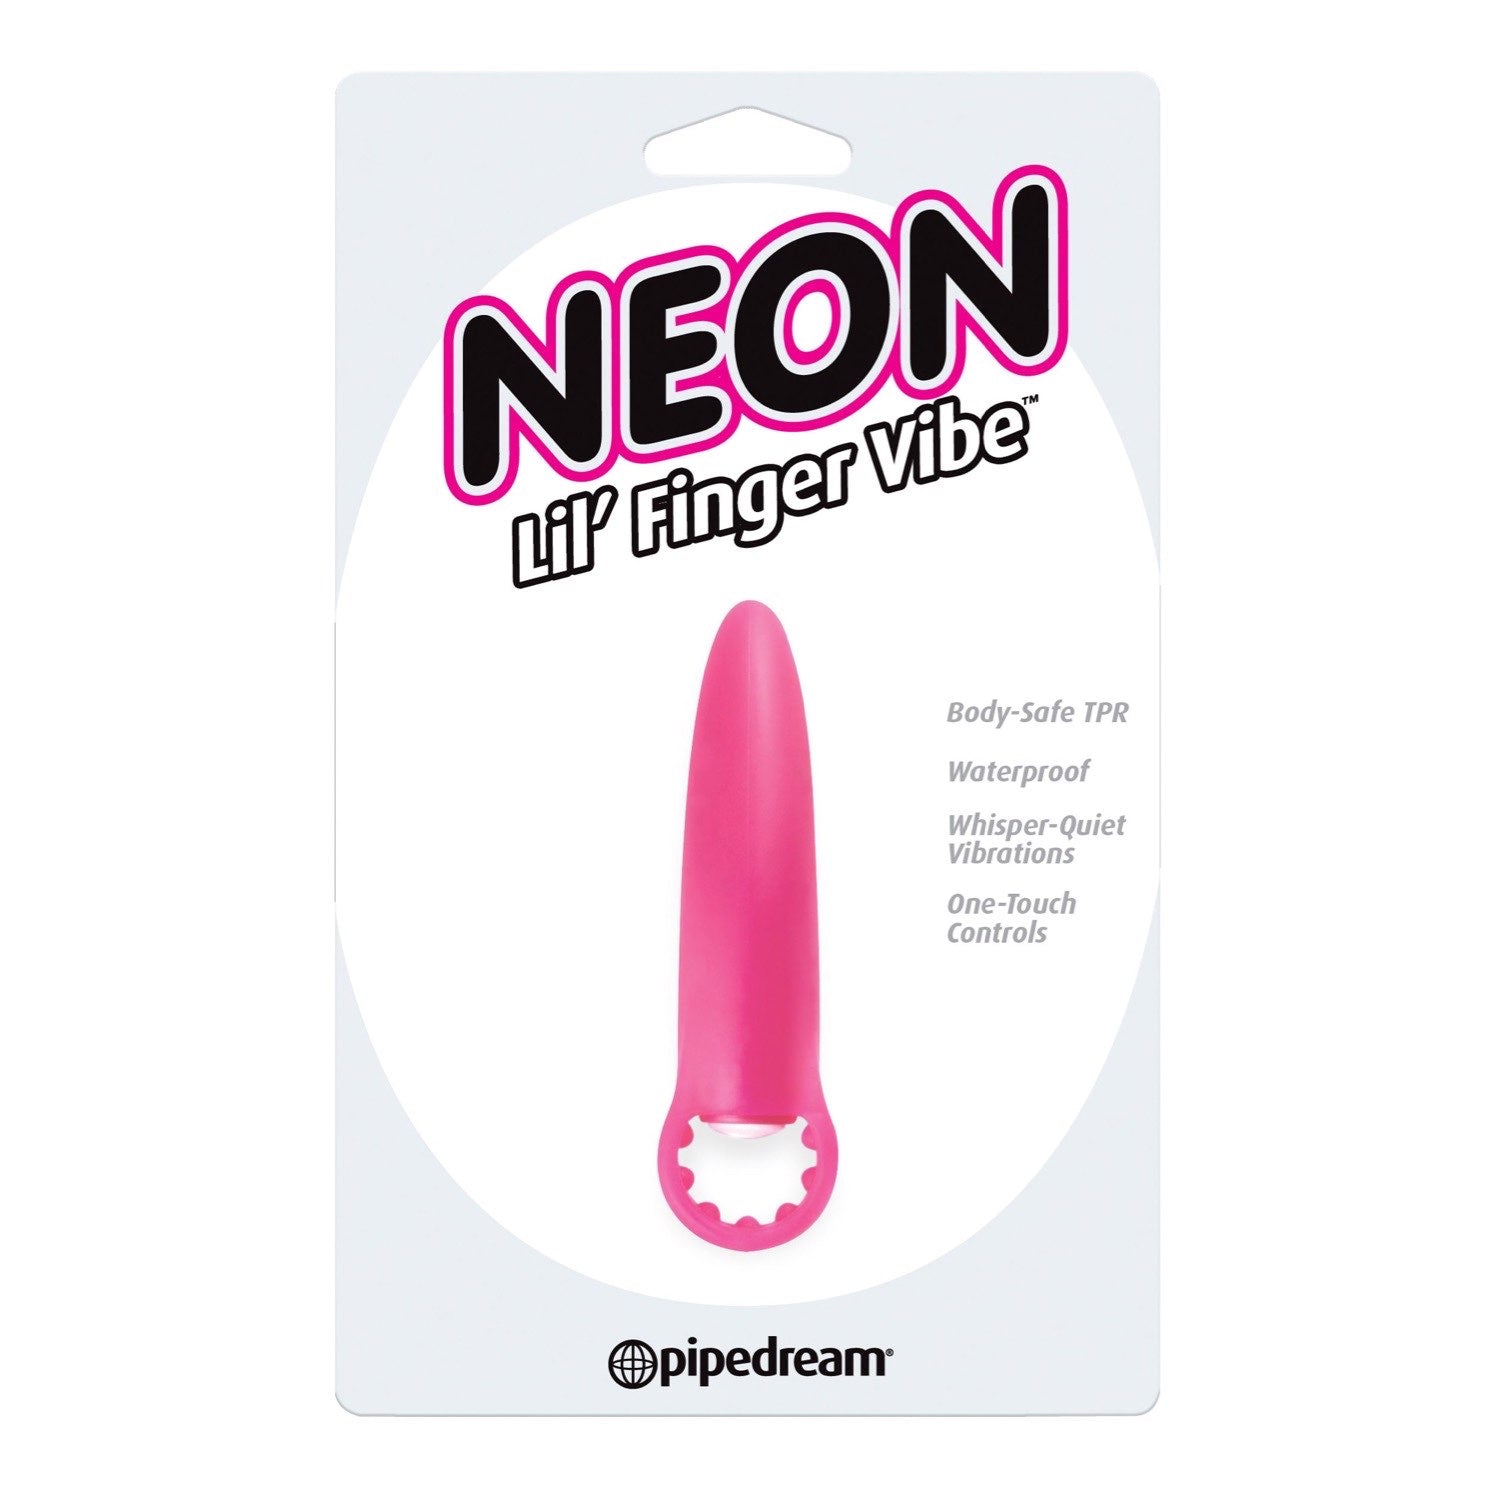  Neon Lil&#39; Finger Vibe - 粉色 8.3 厘米（3.25 英寸）刺激器 by Pipedream